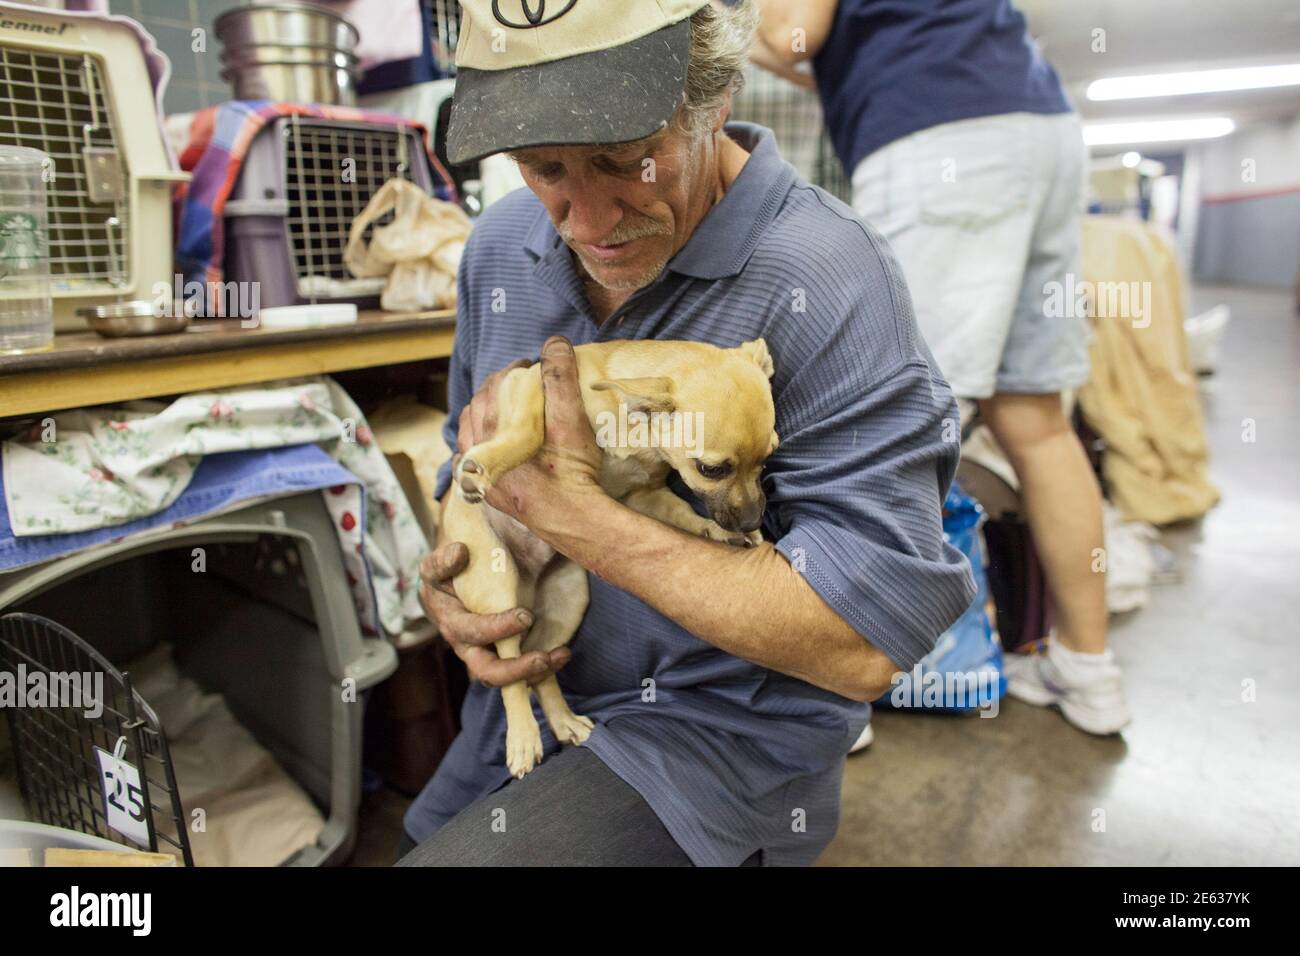 John Conner, whose wife is a veteran, holds his dog as he waits for  veterinarian care at the 13th annual StandDown in Phoenix, Arizona February  14, 2014. More than 1500 homeless veterans